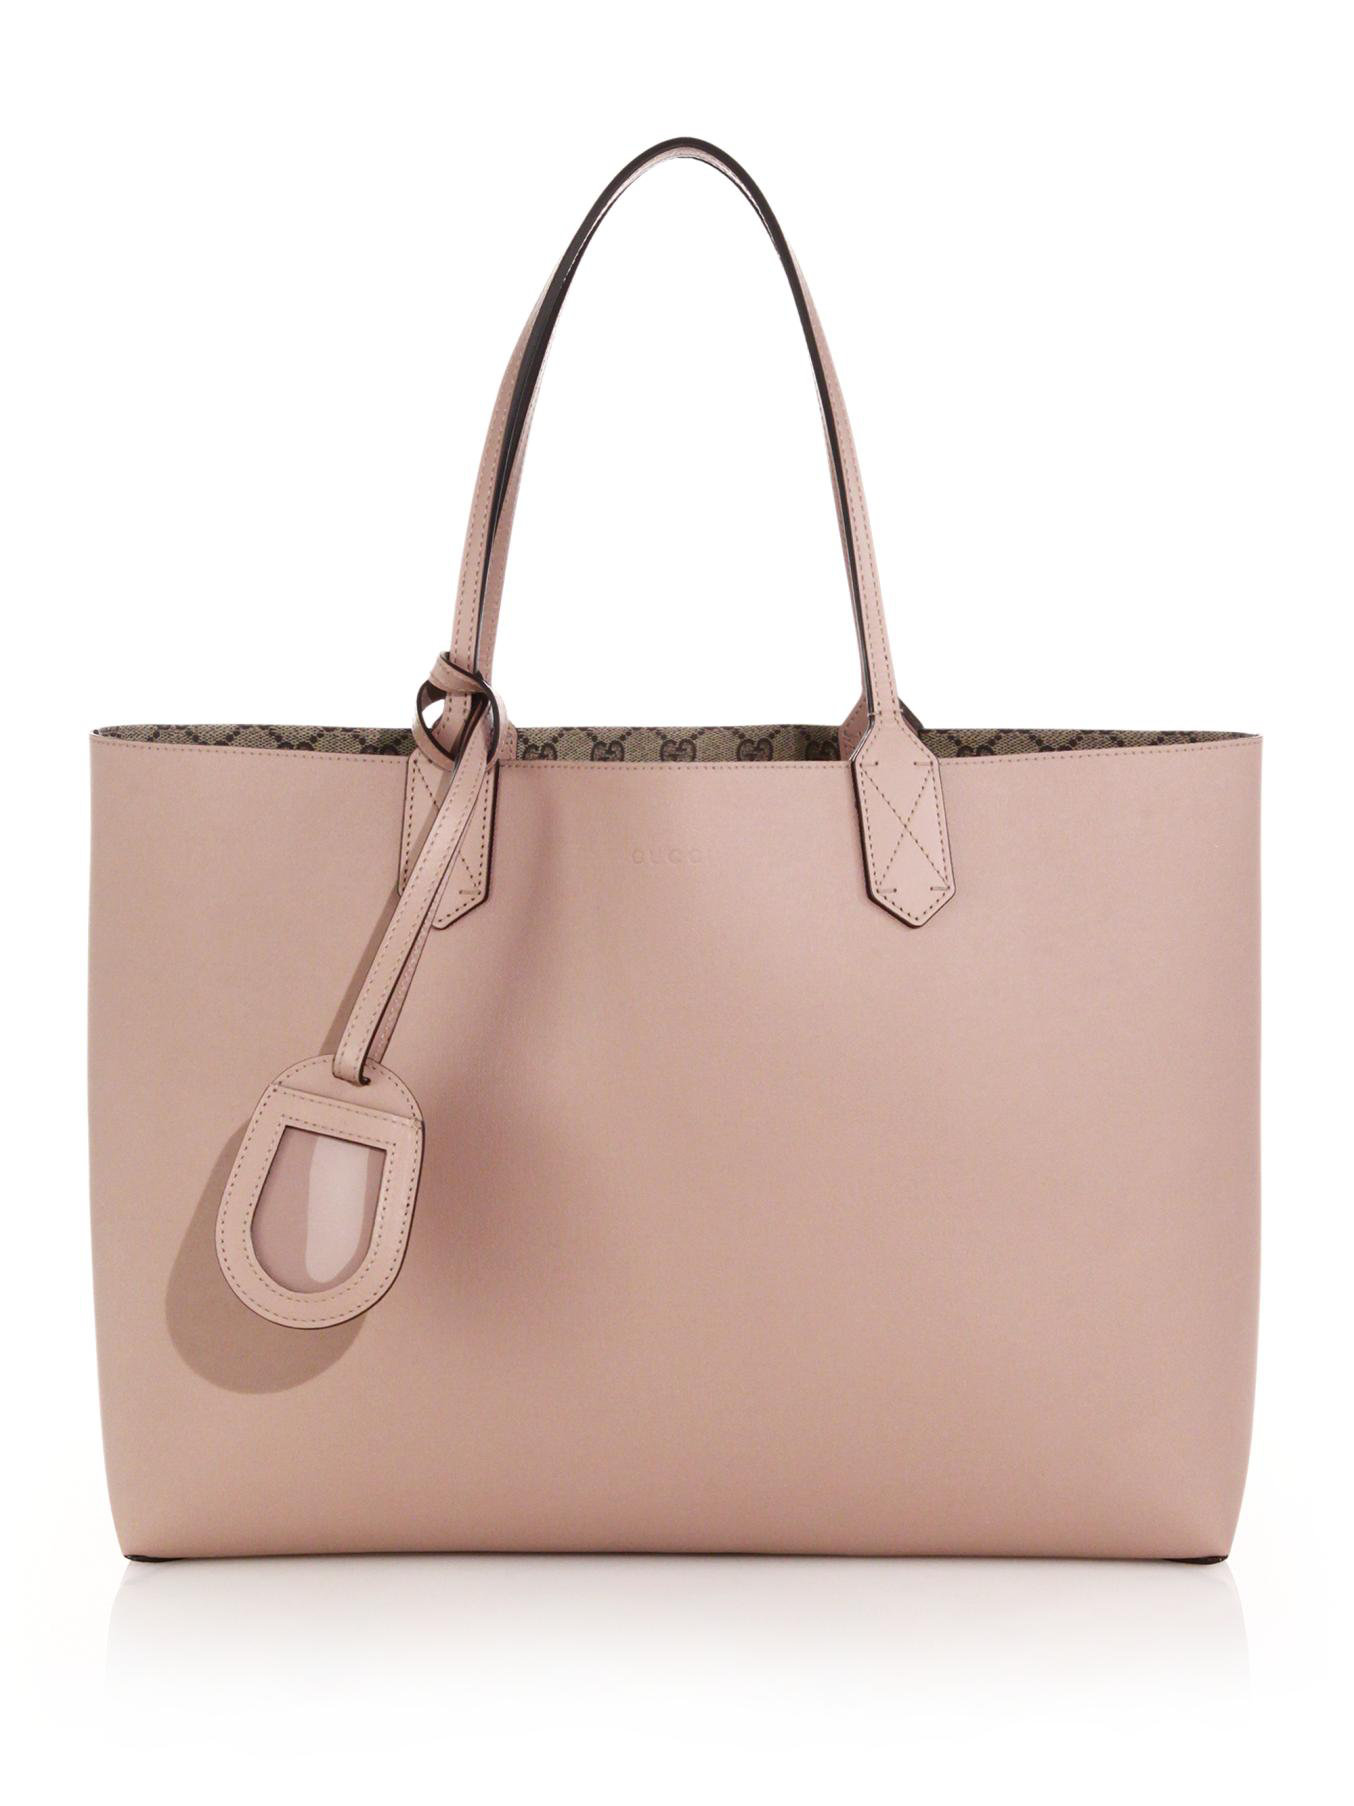 Lyst - Gucci GG Reversible Medium Leather Tote in Pink